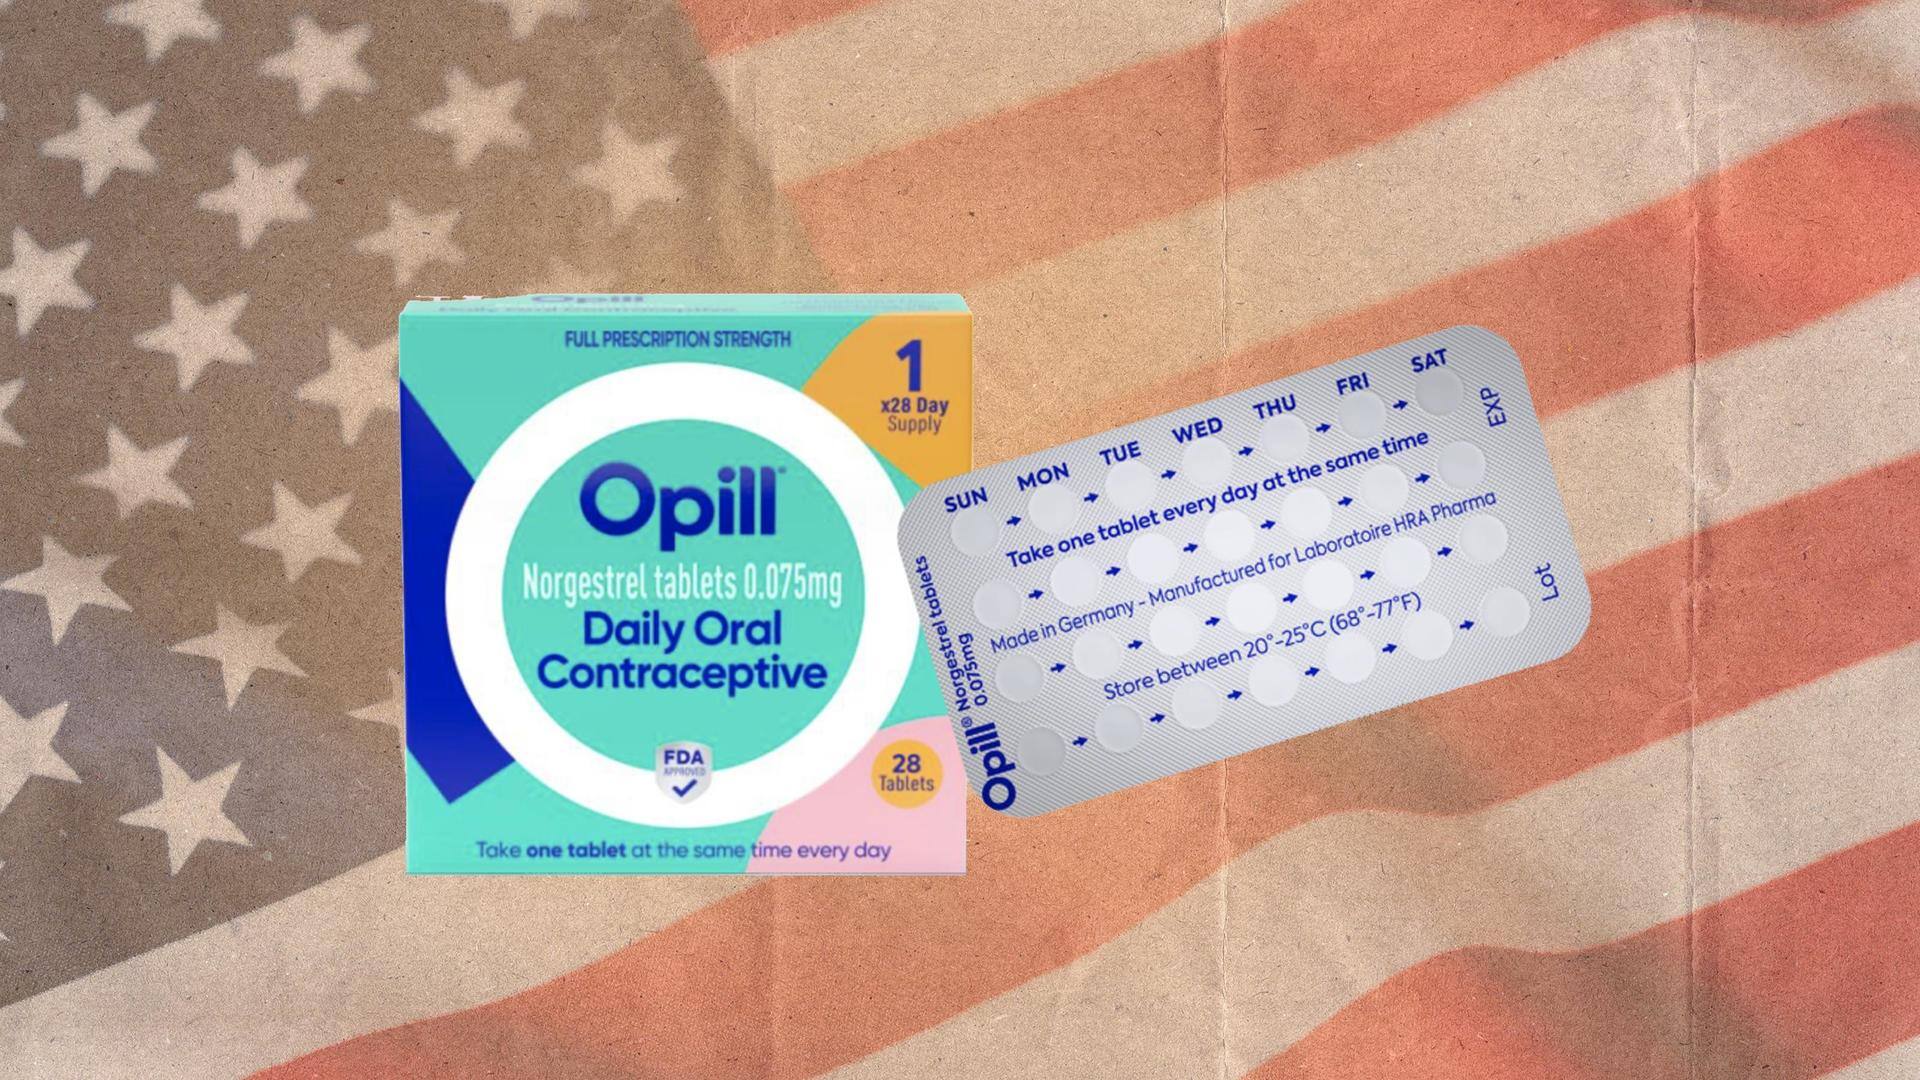 US women can now buy birth control pills without prescription